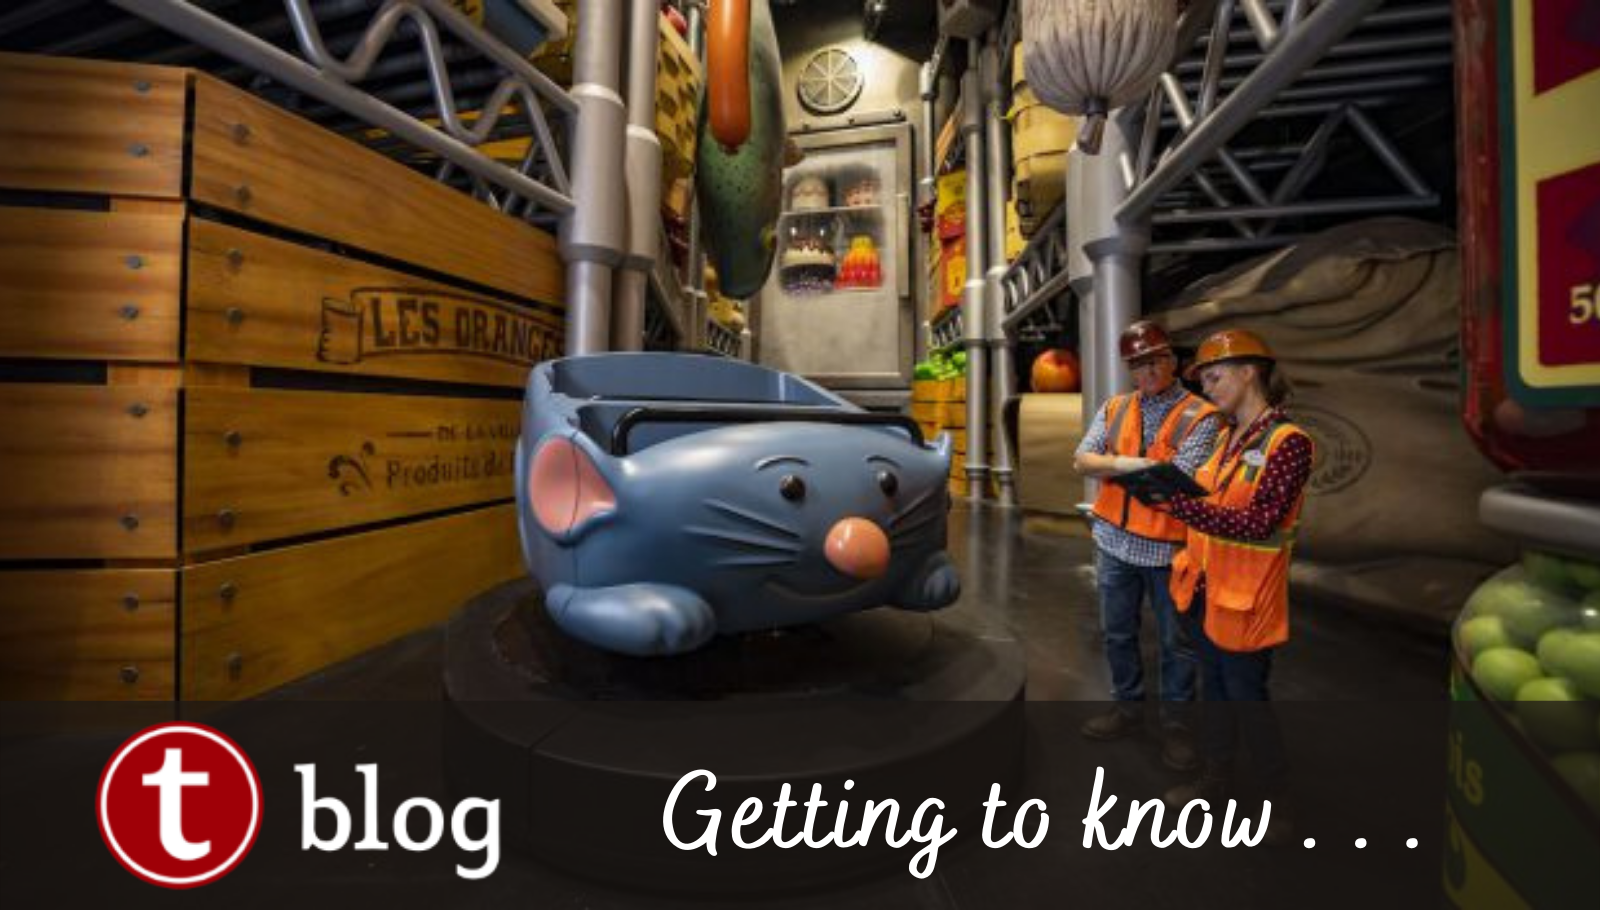 Five Facts about Remy's Ratatouille Adventure cover image showing an empty ride vehicle traveling through the ride.